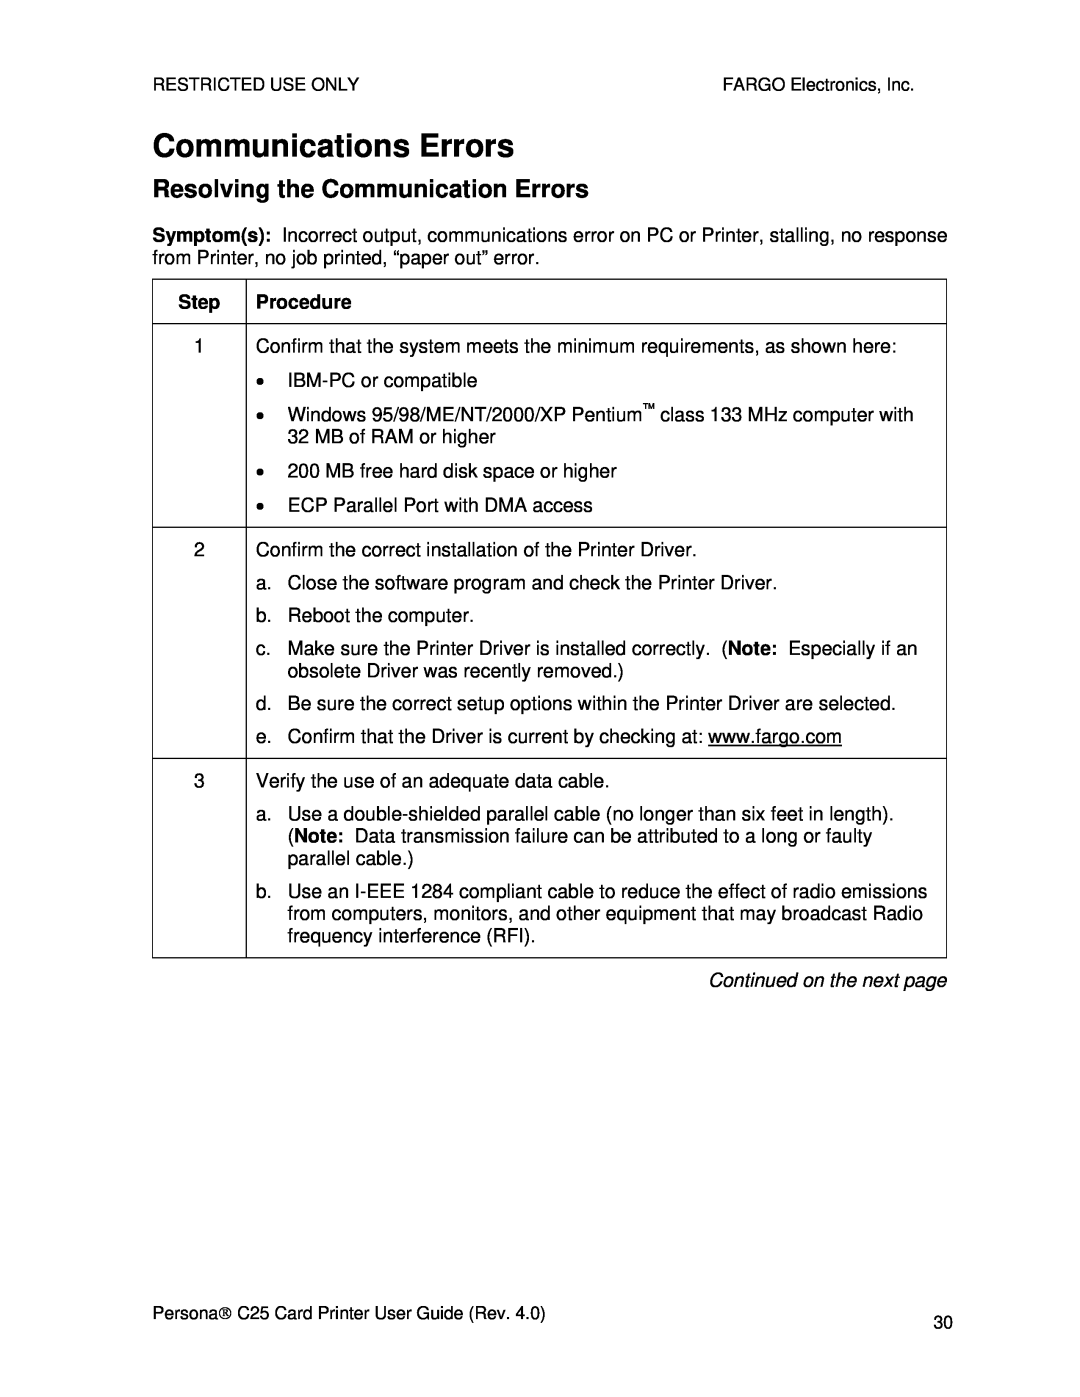 FARGO electronic S000256 manual Communications Errors, Resolving the Communication Errors, Continued on the next page 